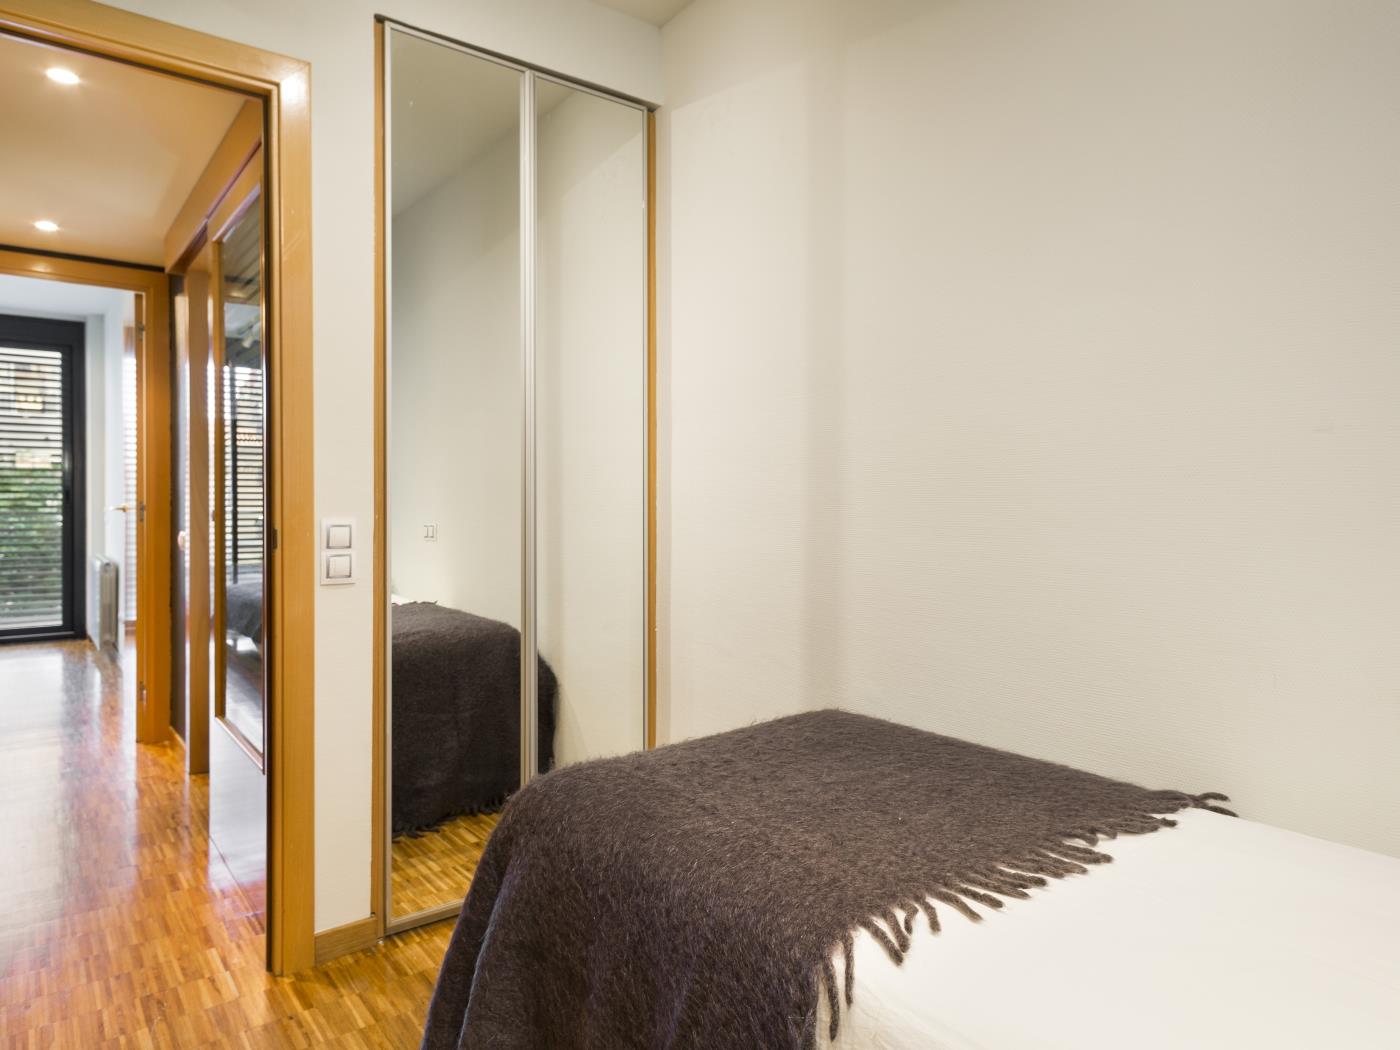 Corporate Executive Apartment near the City Center with balcony for 6 - My Space Barcelona Apartments